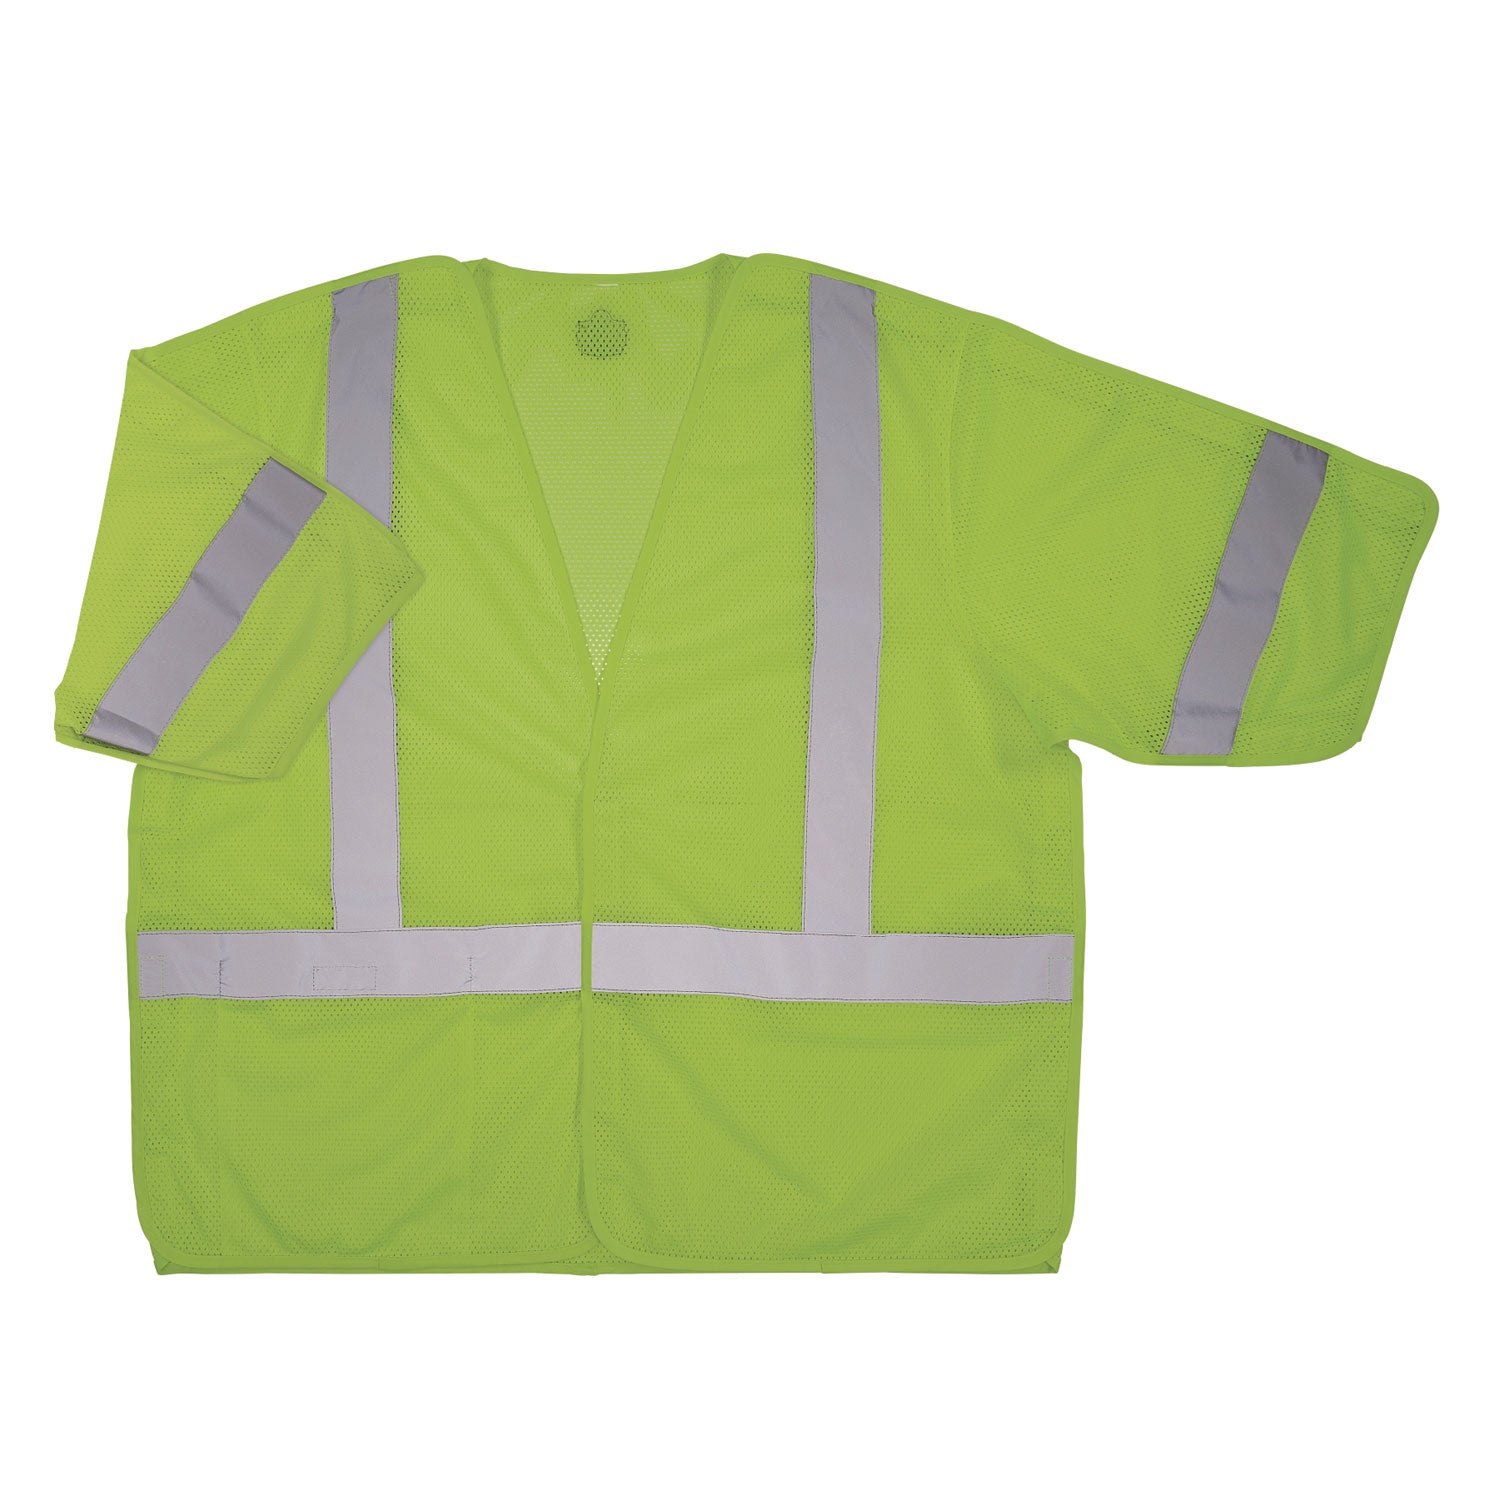 glowear-8315ba-class-3-hi-vis-breakaway-safety-vest-large-to-x-large-lime-ships-in-1-3-business-days_ego23055 - 1